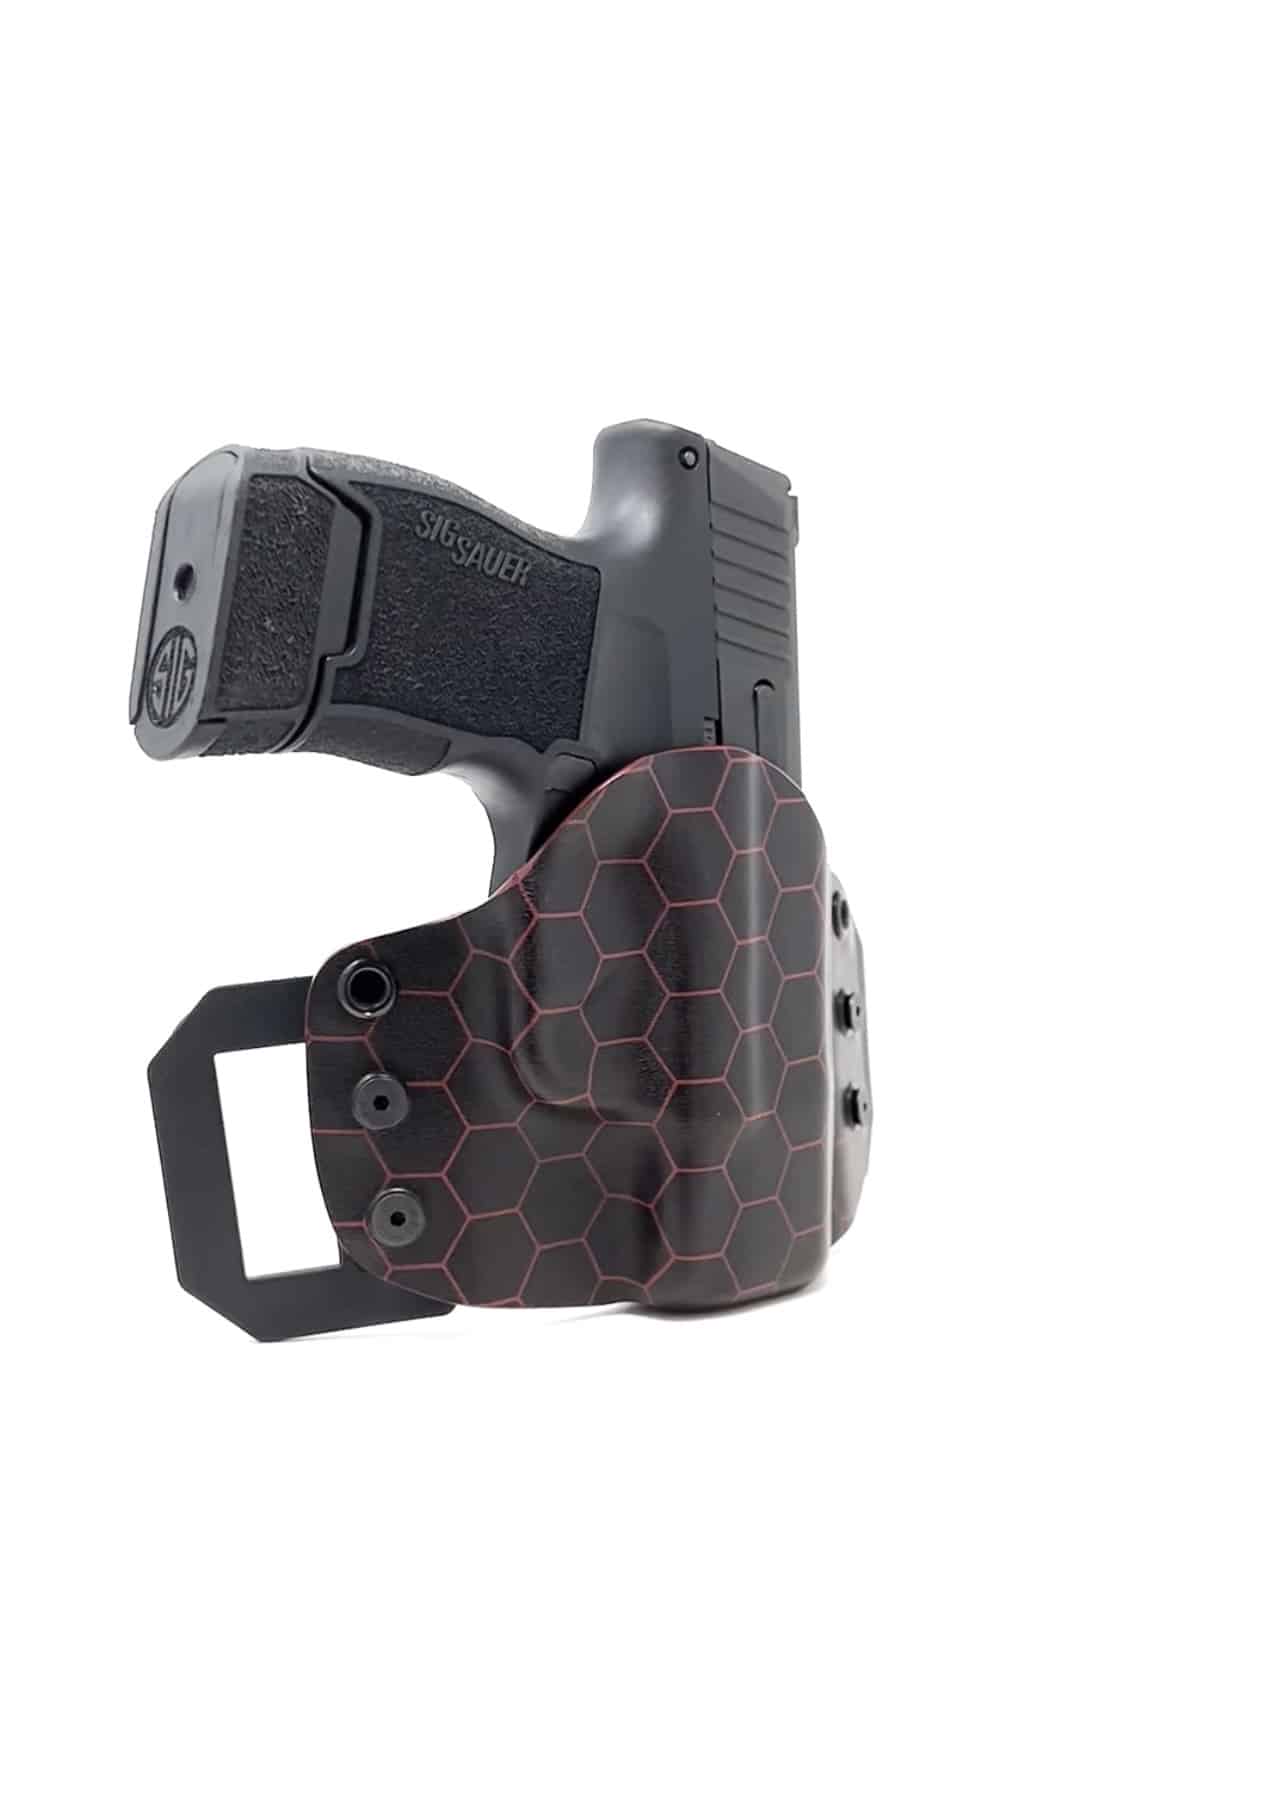 G-CODE large paddle black kydex ambi holster double mag carrier mount 1.5" 